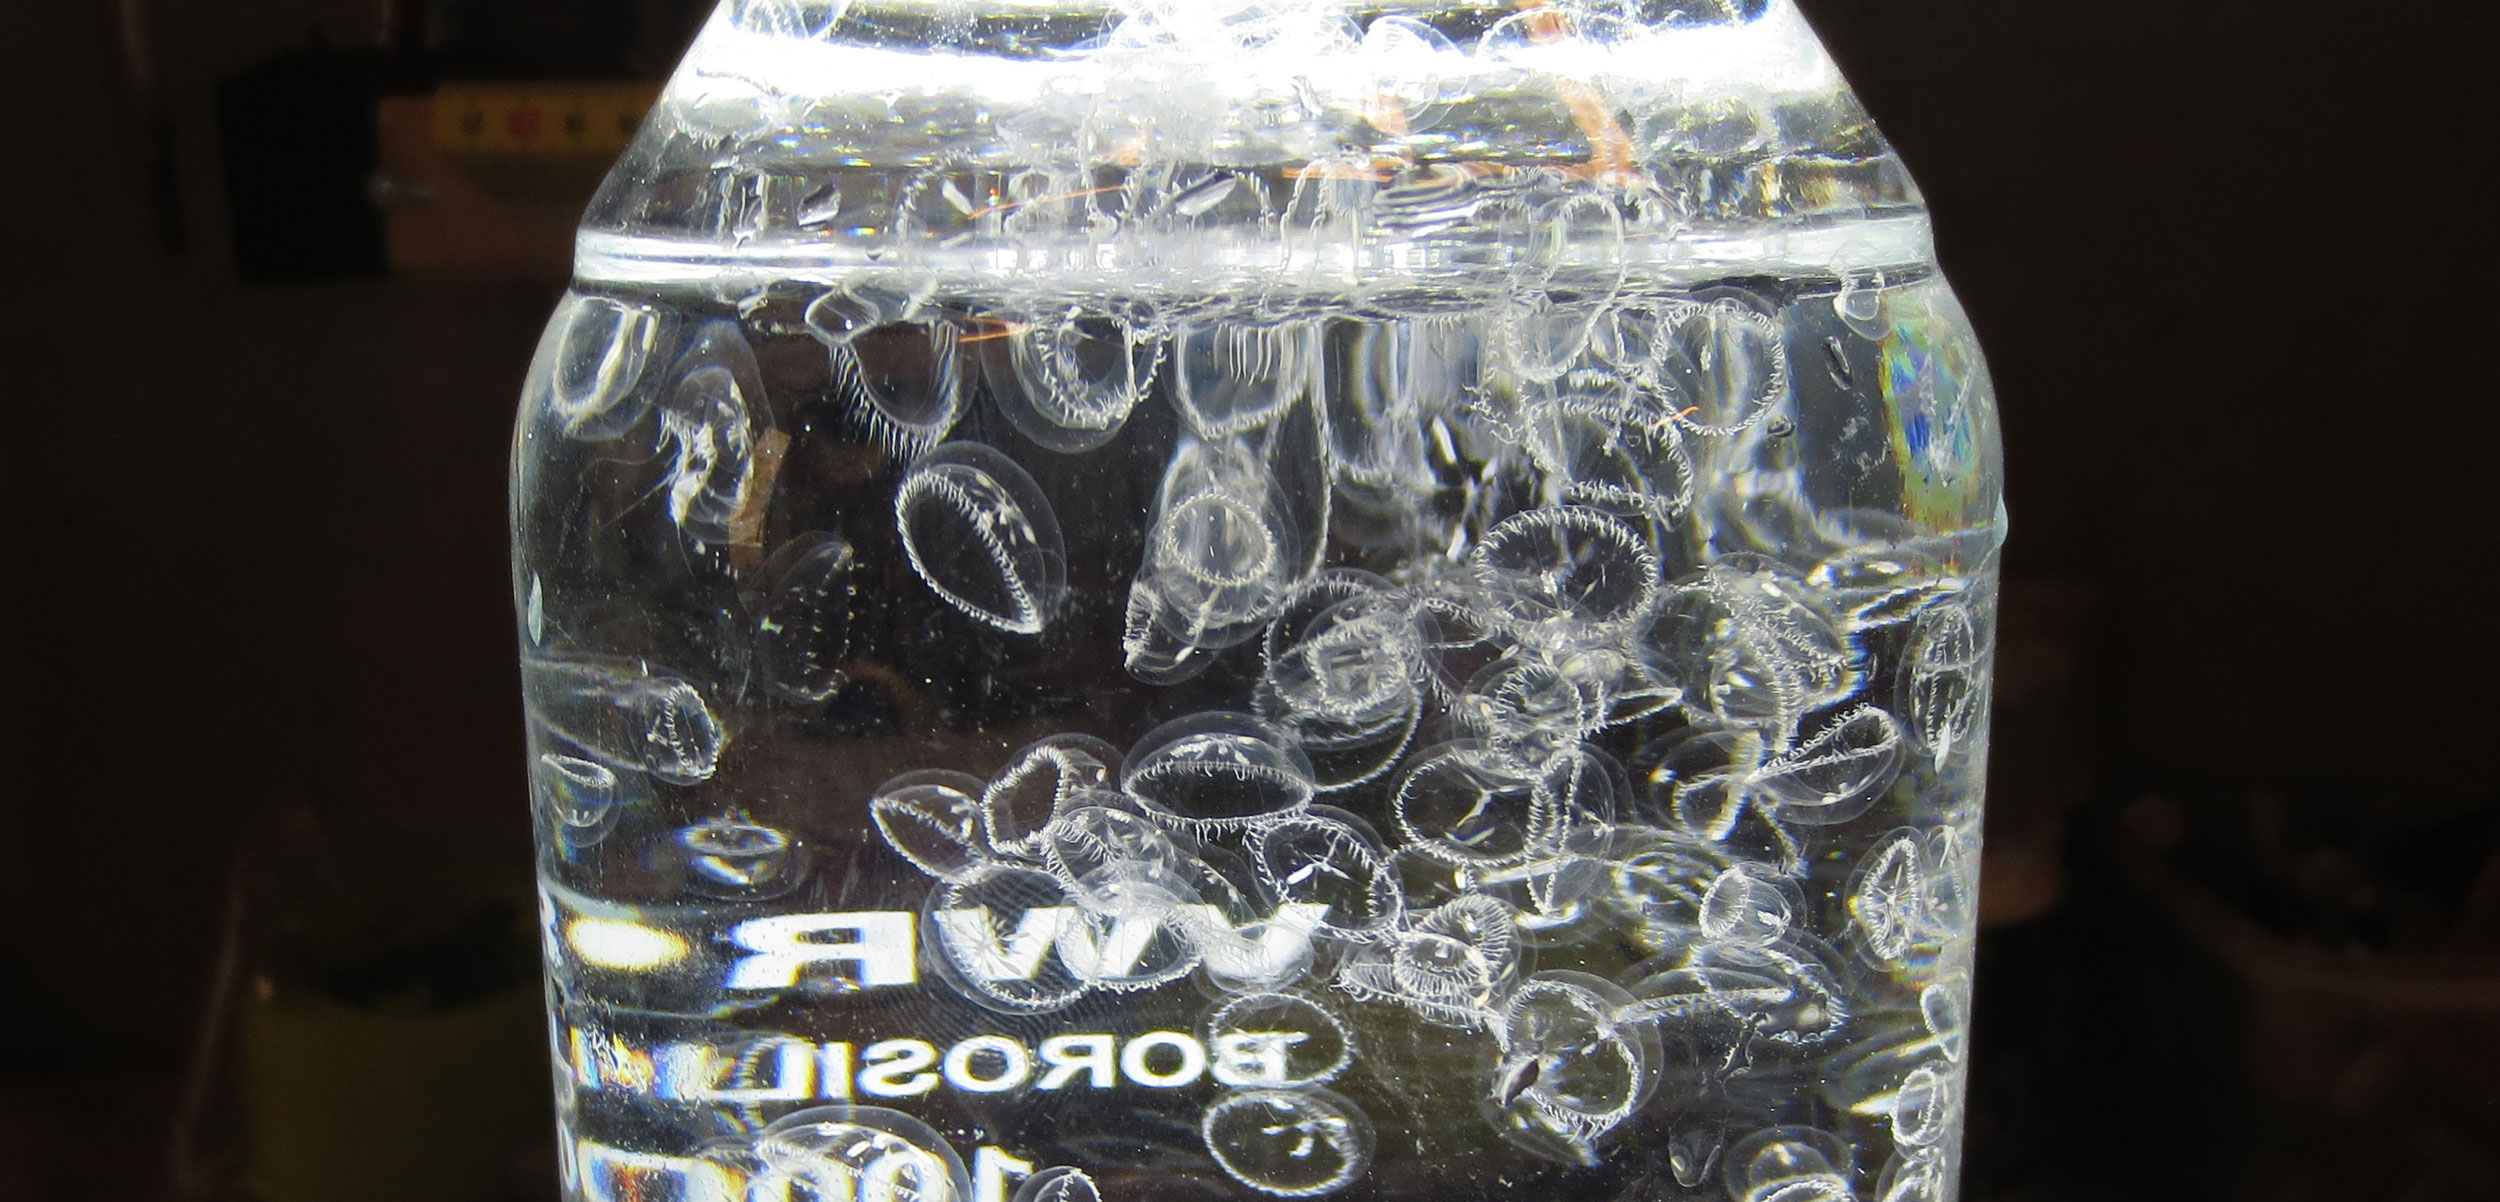 a bottle with Dipleurosoma typicum jellyfish floating in it